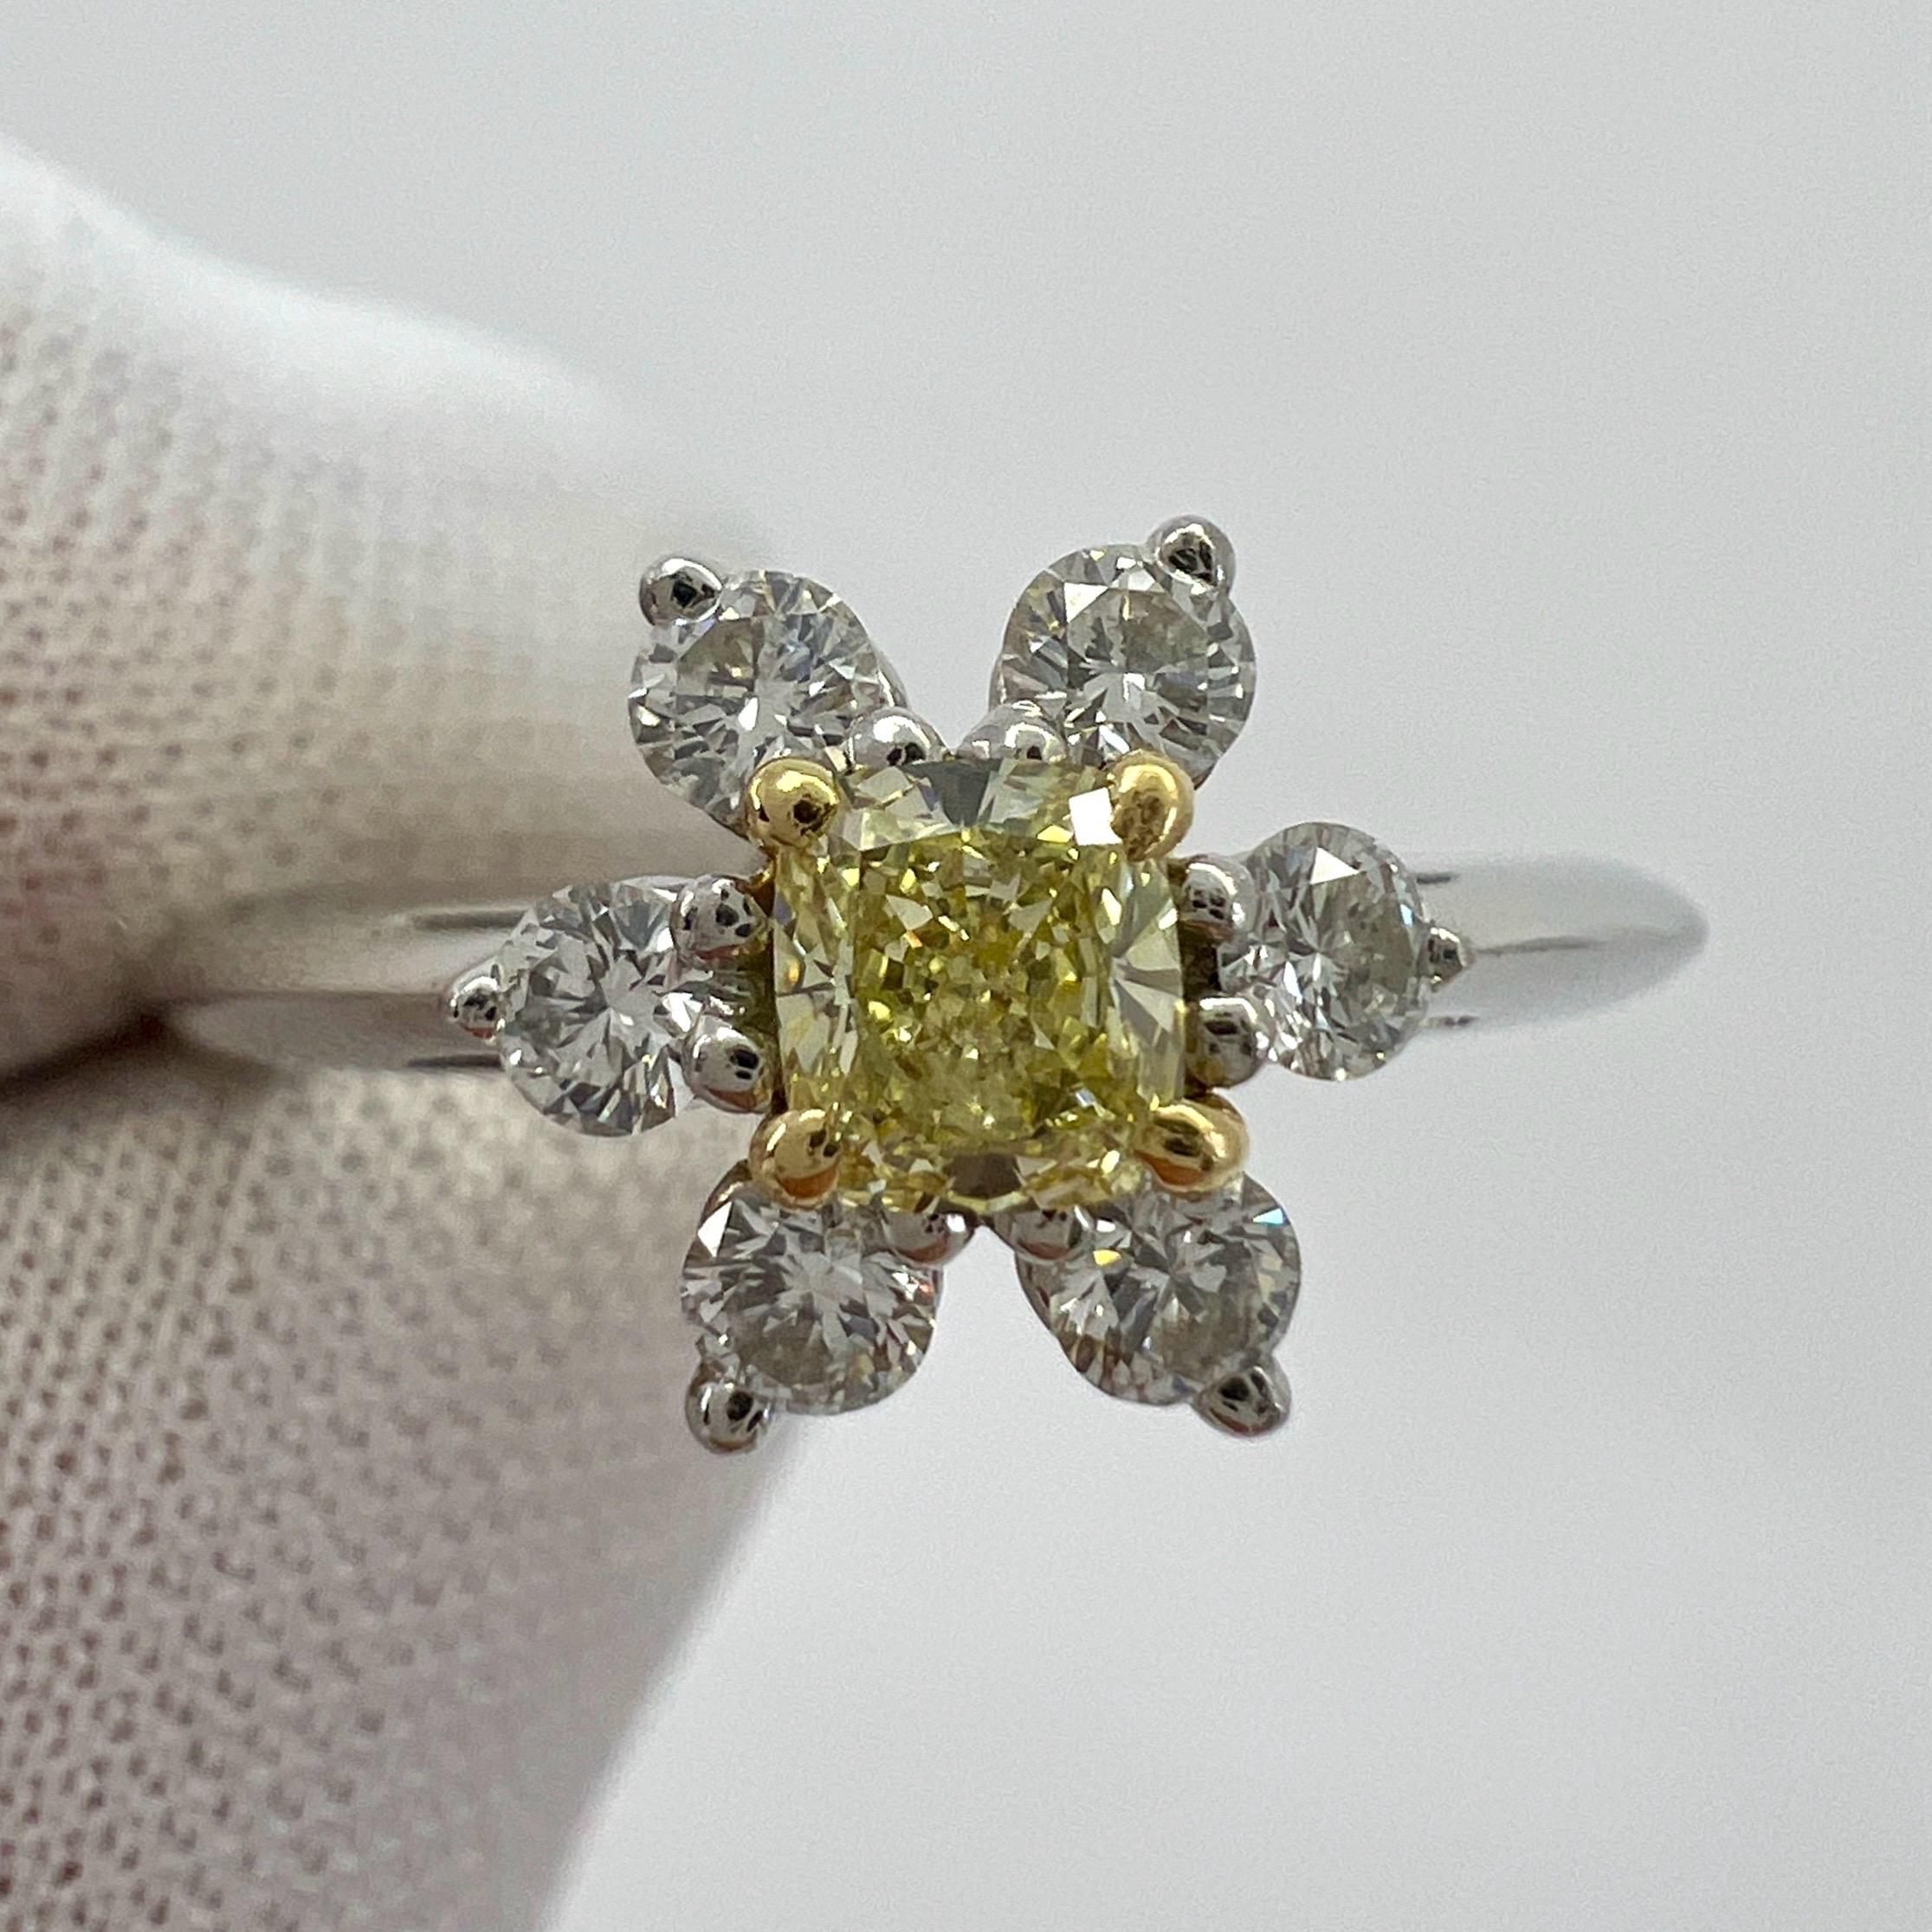 Fine Vintage Tiffany & Co. Fancy Yellow And White Diamond 18k Gold & Platinum Buttercup Cluster Ring.

A beautifully made mixed metal cluster ring set with a stunning 0.25ct fancy yellow cushion cut diamond centre stone. 
This diamond has a full